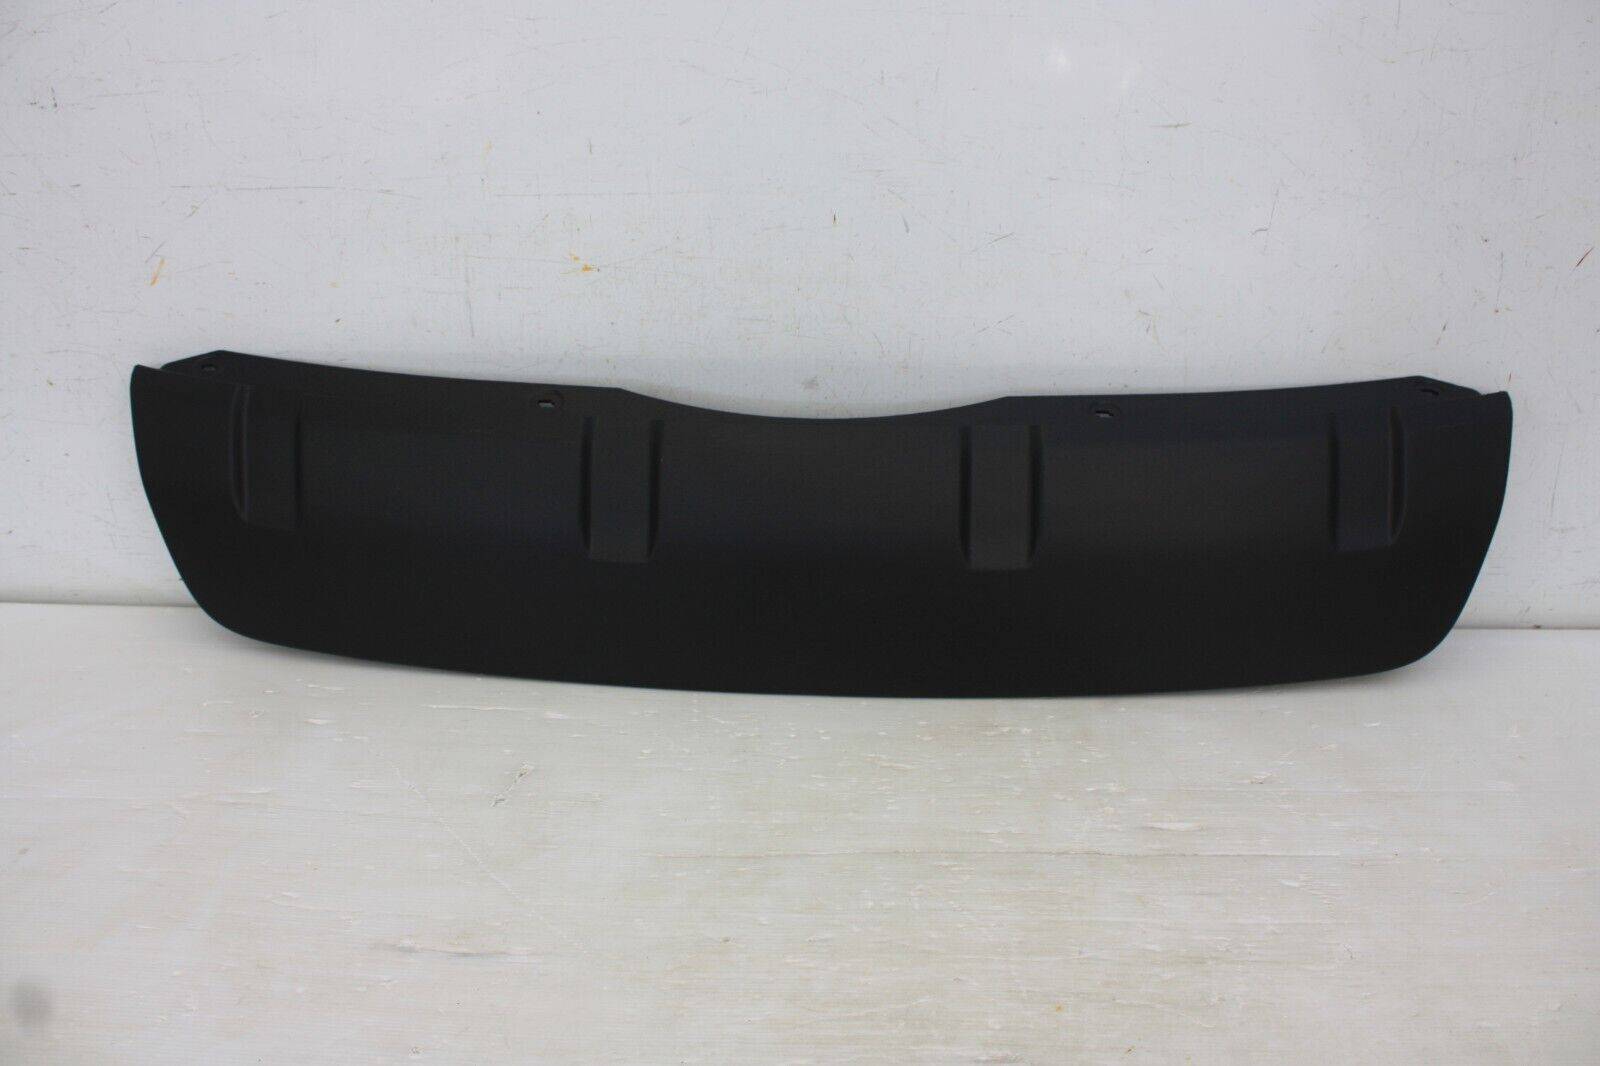 Land Rover Discovery Rear Bumper Tow Eye Cover 2017 ON HY32 17K950 AA Genuine 175681063463